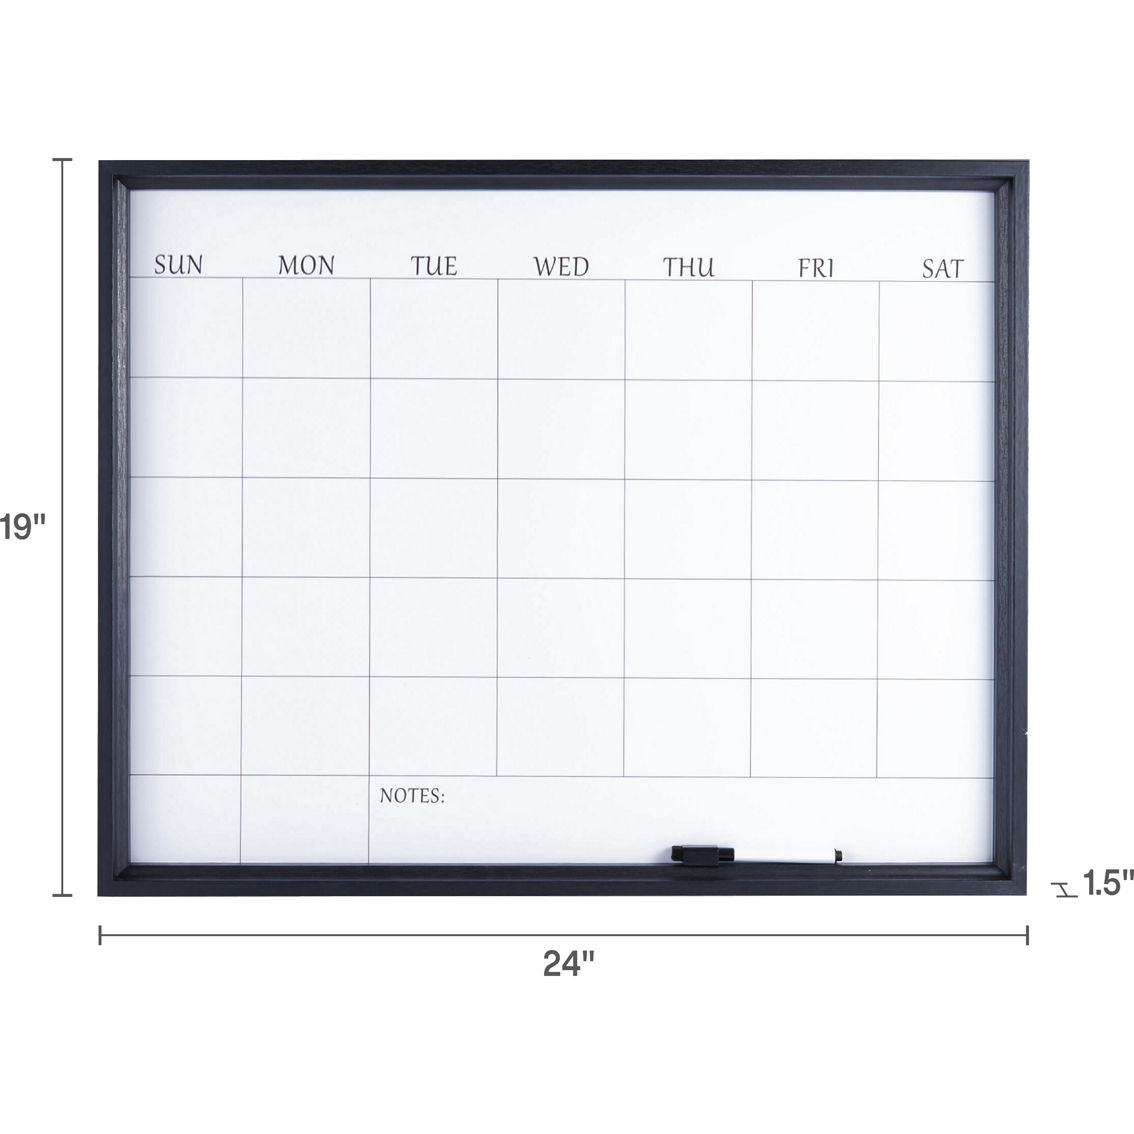 Towle Living 24 x 19 in. Black Calendar Whiteboard with Dry Erase Pen - Image 5 of 5